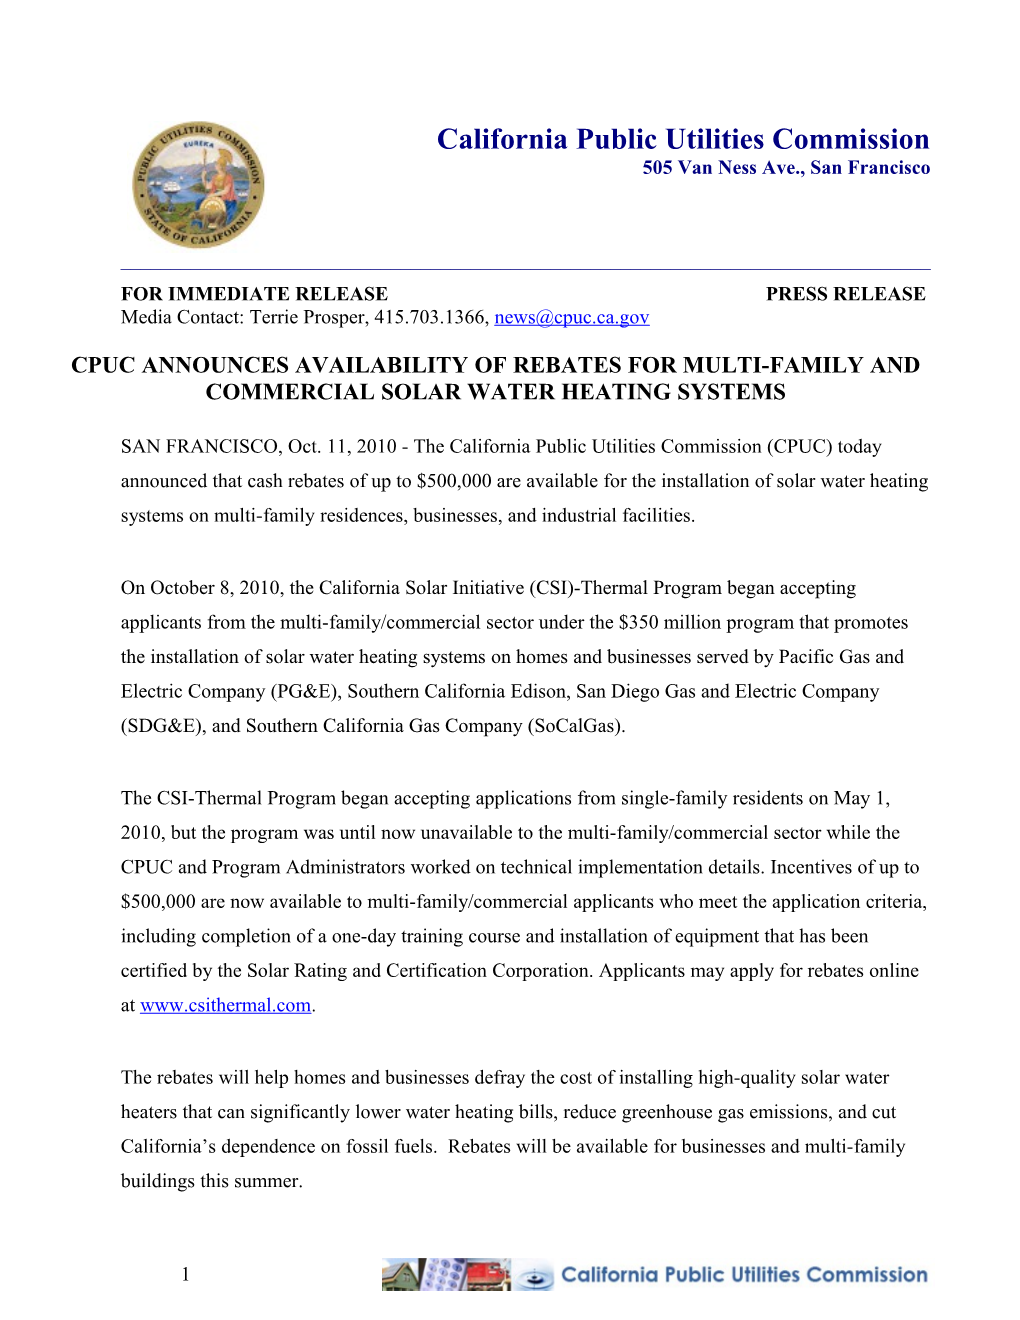 CPUC ANNOUNCES AVAILABILITY of Rebates for Multi-FAMILY and COMMERCIAL Solar Water